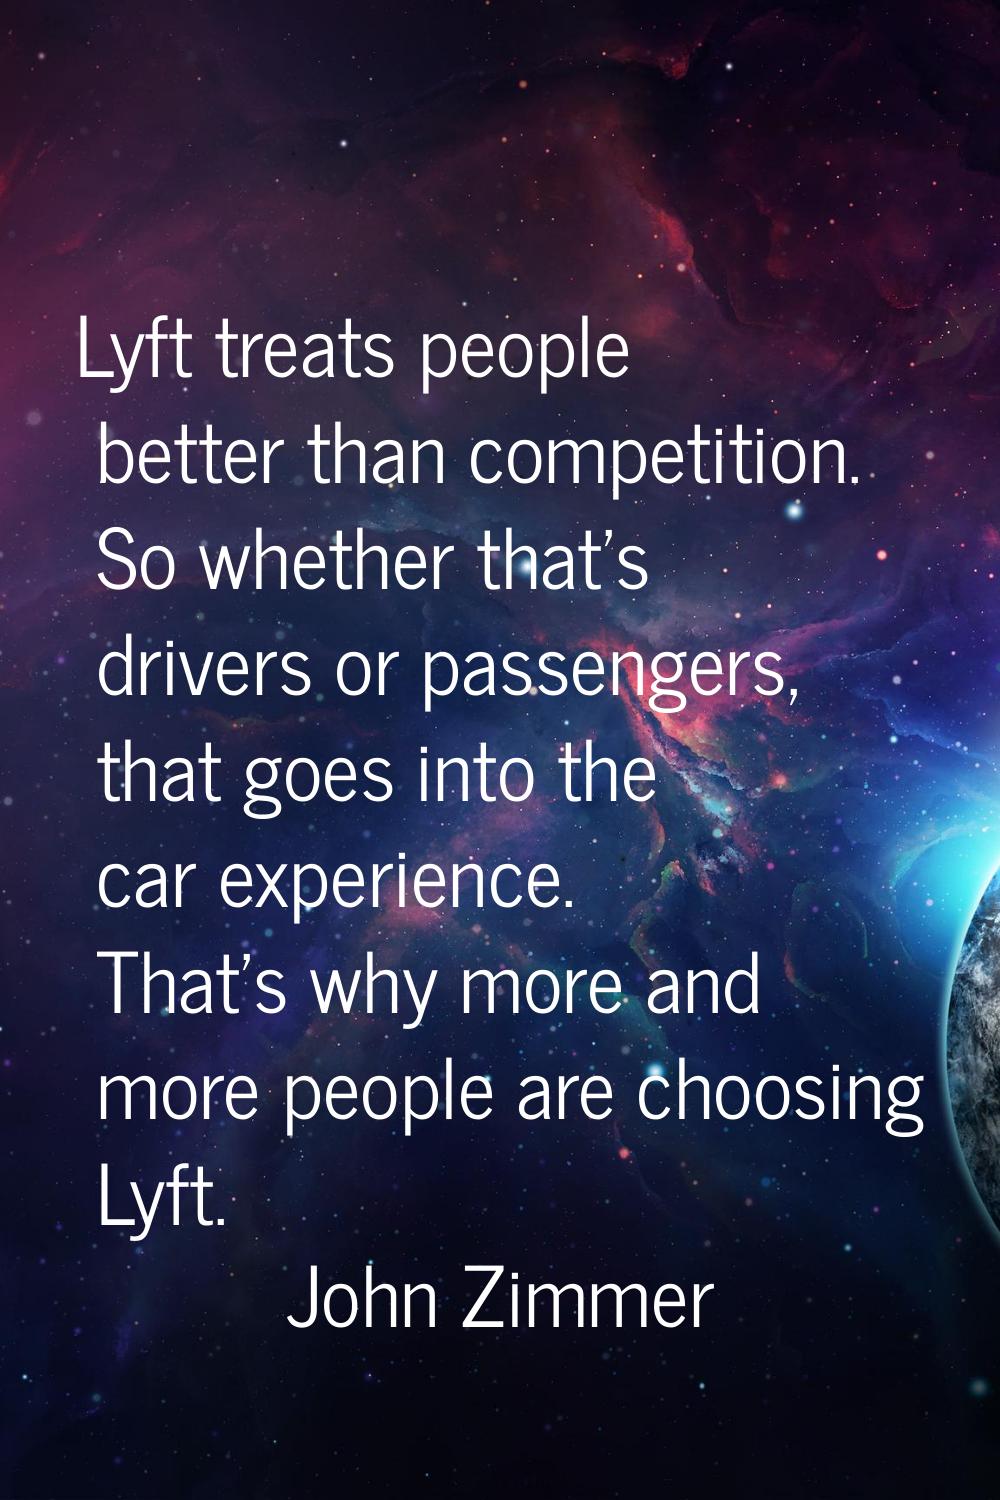 Lyft treats people better than competition. So whether that's drivers or passengers, that goes into